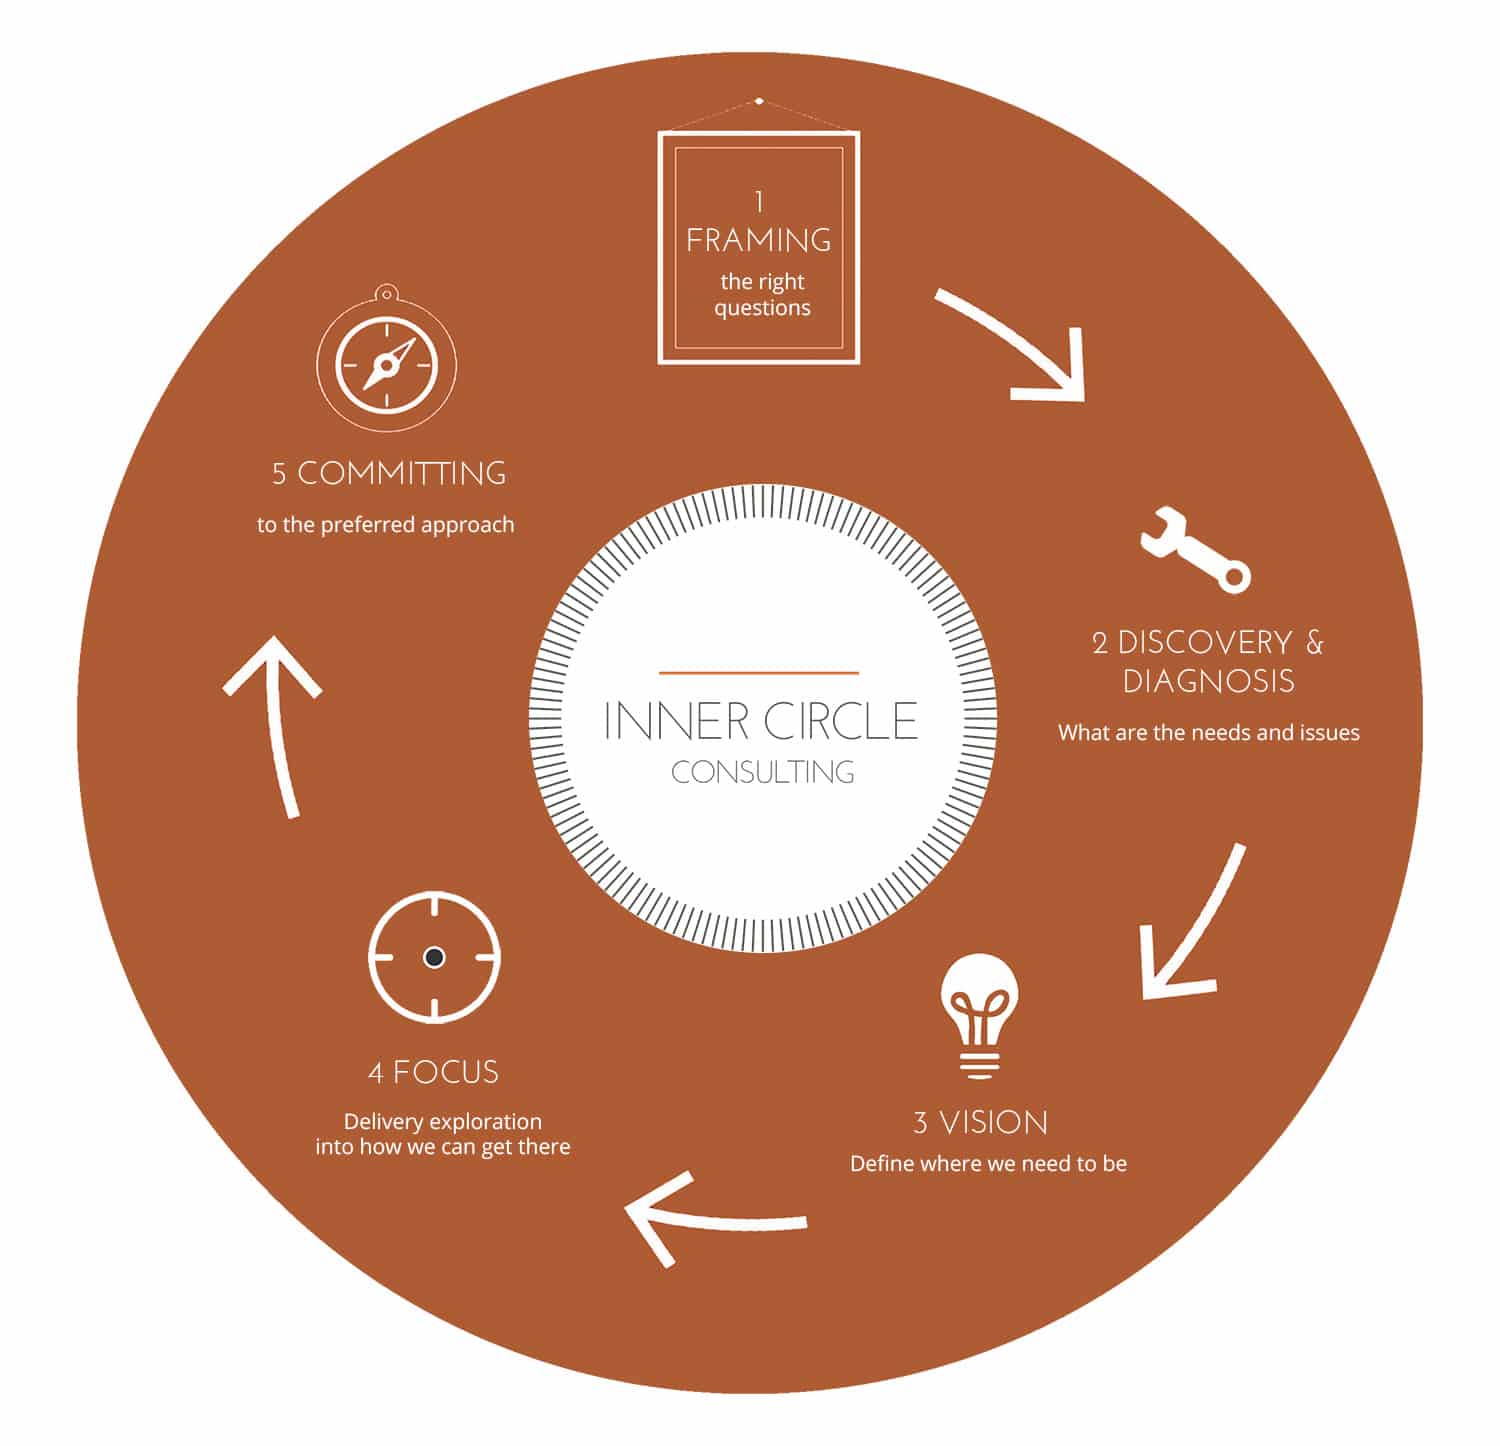 Inner Circle Consulting recipe for a great strategy